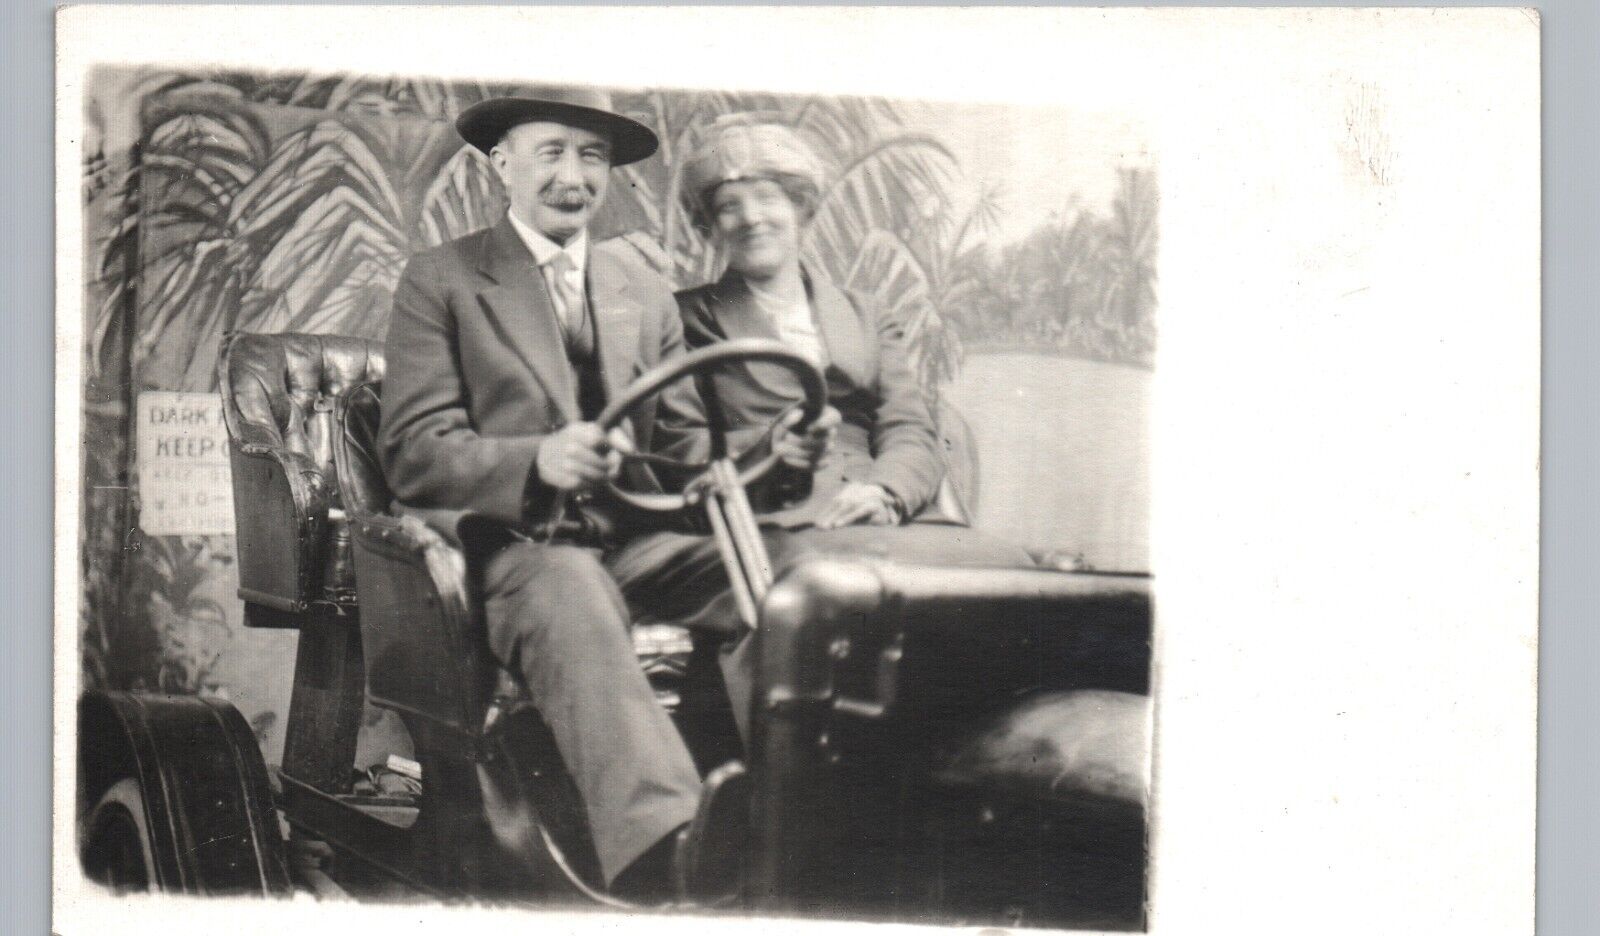 DRIVING SILLY PROP CAR real photo postcard rppc early arcade auto car man woman